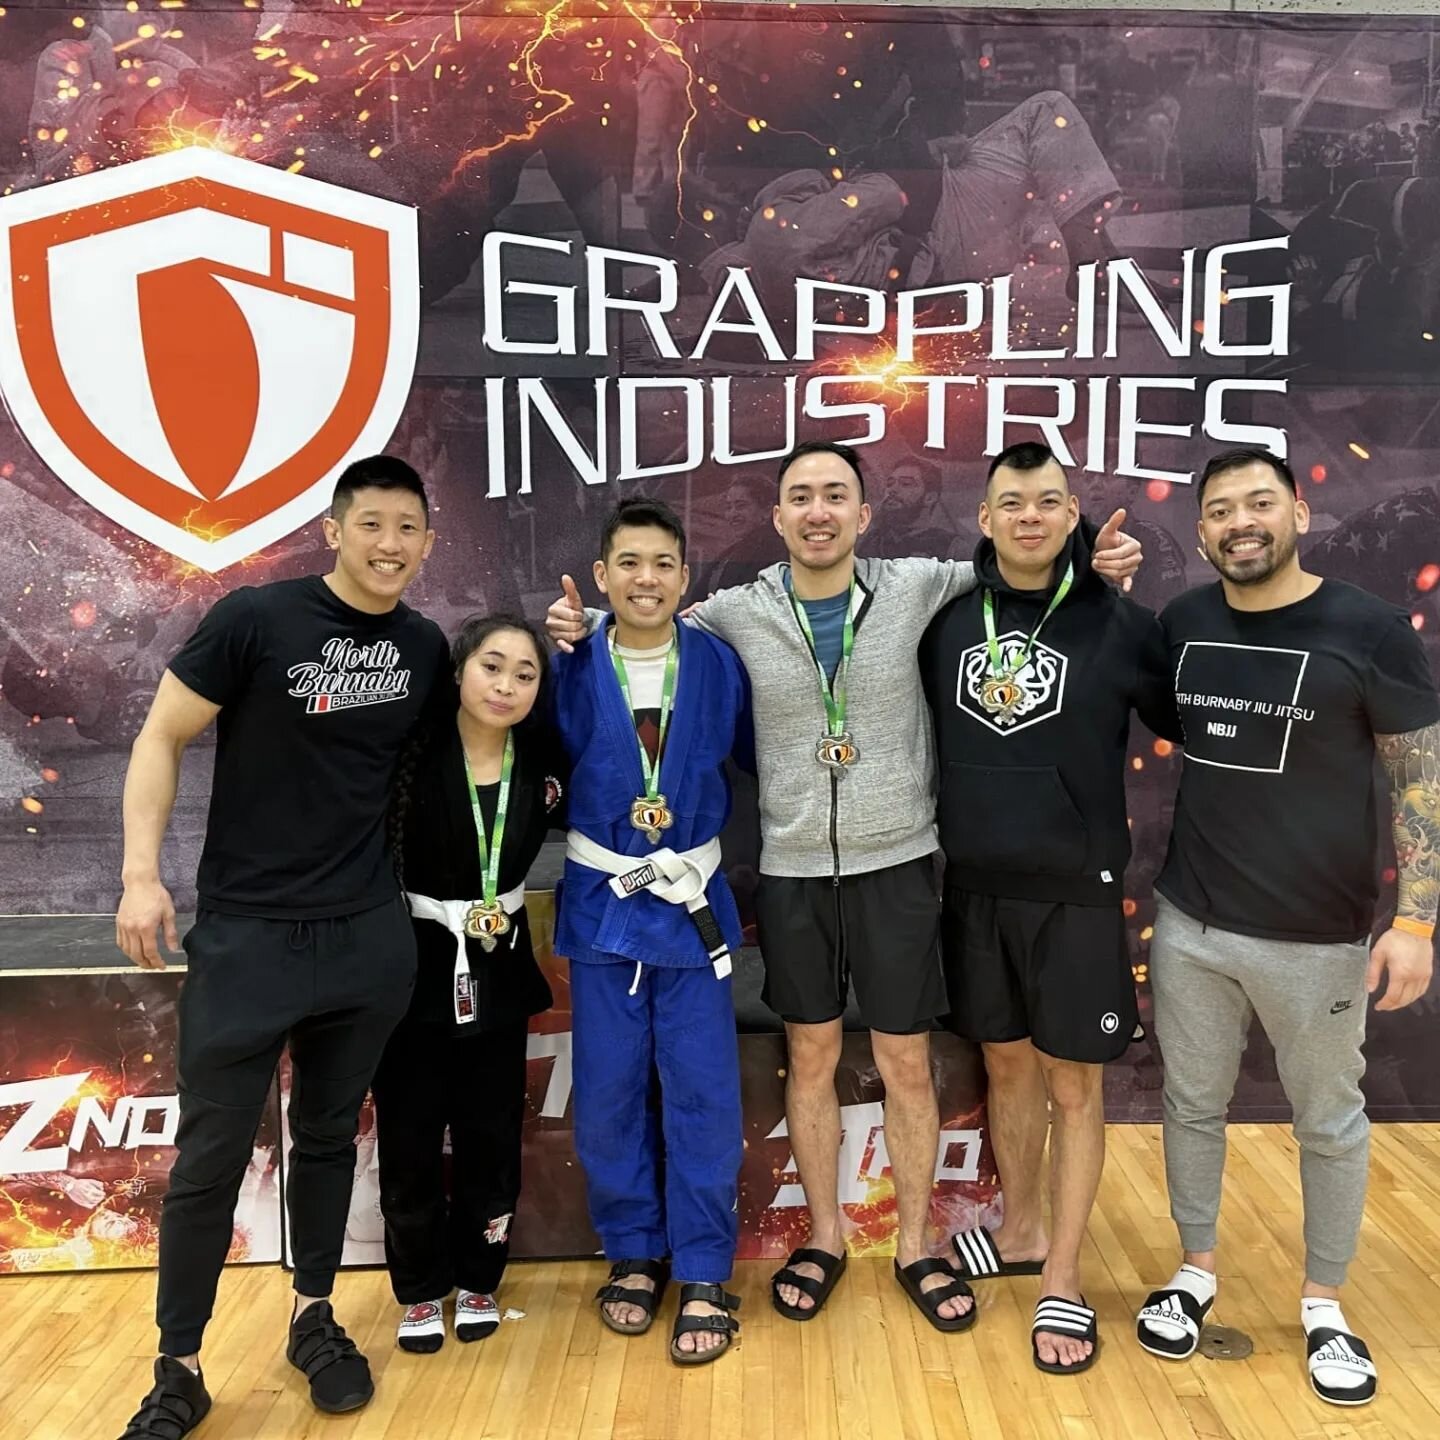 We just wrapped up an incredible weekend at Grappling Industry, and we couldn't be prouder of our team. It was amazing to see so many of our athletes out there on the mats, pushing themselves to the limit and showing what they're made of. 

All in al